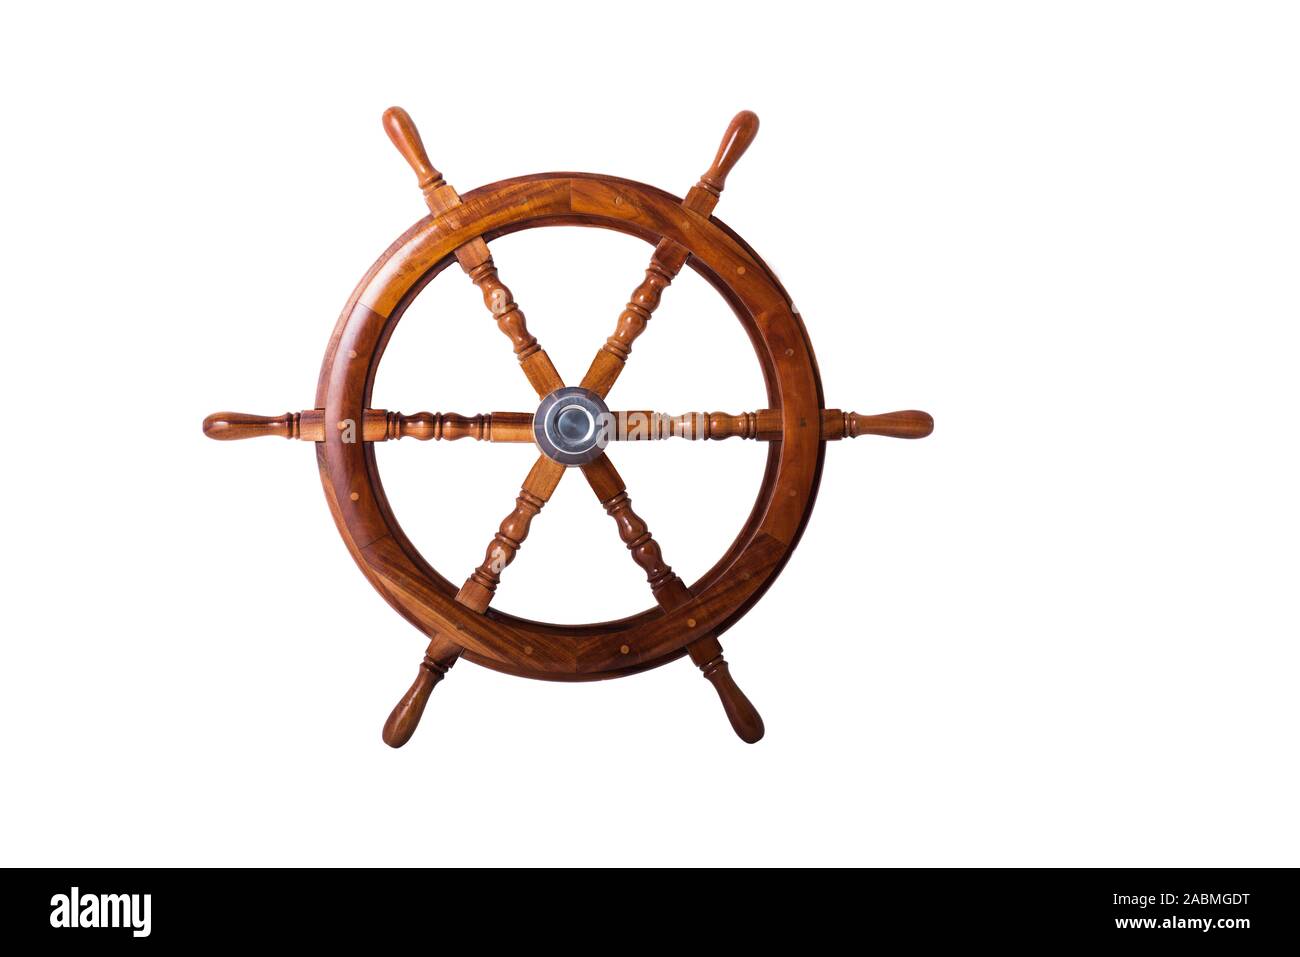 Old ship vintage, wooden steering wheel isolated on white background Stock Photo